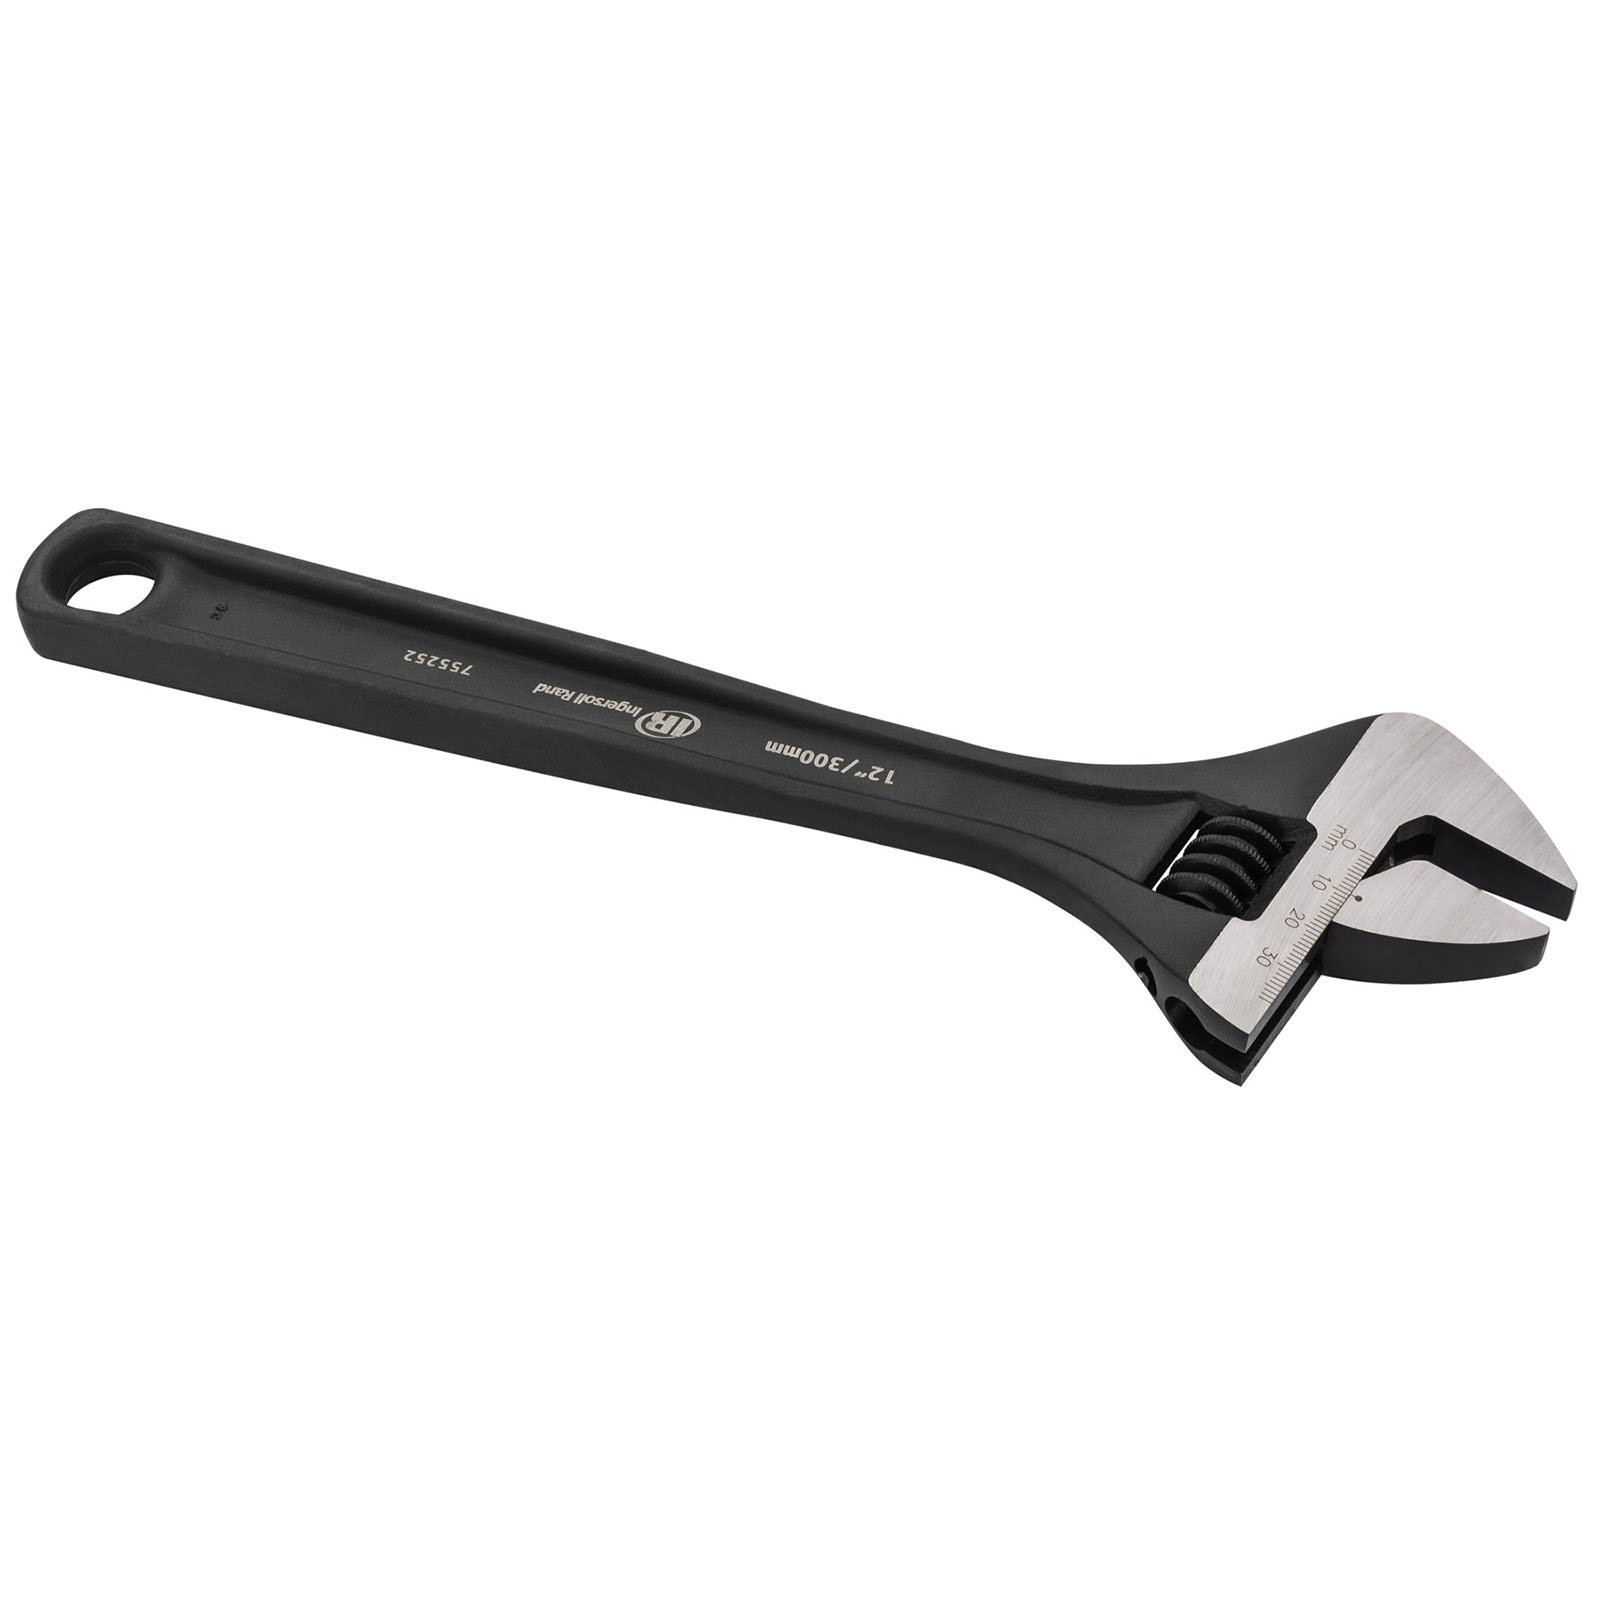 Ingersoll Rand 12 Inch Adjustable Wrench - 755252X